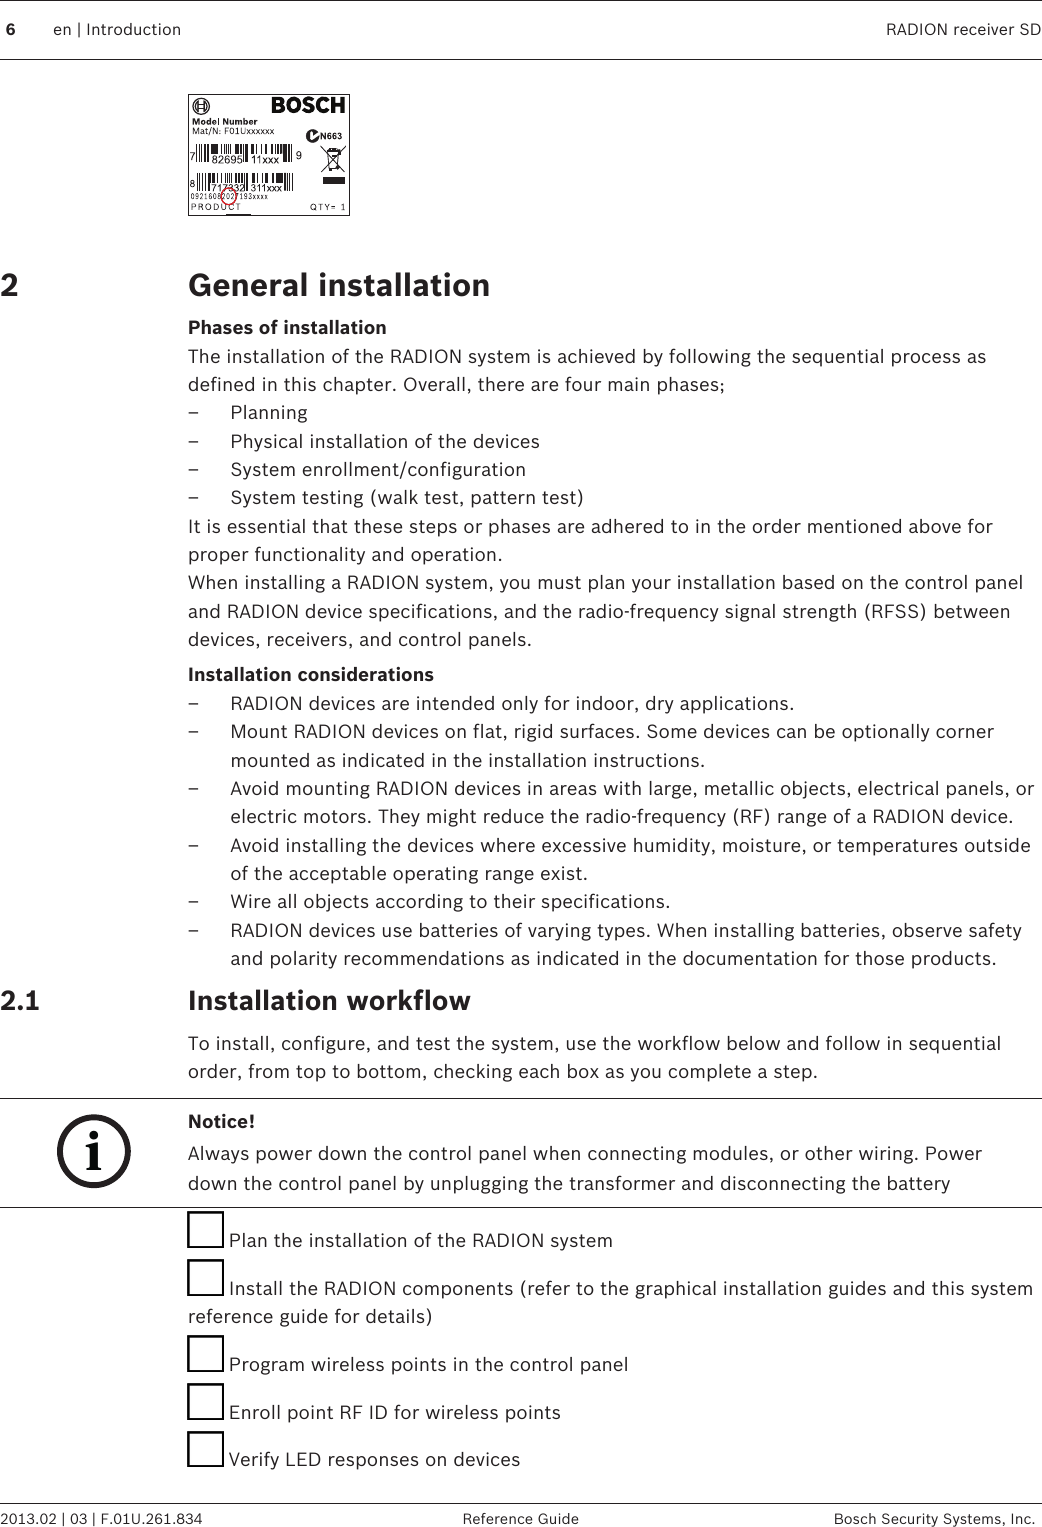  General installationPhases of installationThe installation of the RADION system is achieved by following the sequential process asdefined in this chapter. Overall, there are four main phases;– Planning– Physical installation of the devices– System enrollment/configuration– System testing (walk test, pattern test)It is essential that these steps or phases are adhered to in the order mentioned above forproper functionality and operation.When installing a RADION system, you must plan your installation based on the control paneland RADION device specifications, and the radio-frequency signal strength (RFSS) betweendevices, receivers, and control panels.Installation considerations– RADION devices are intended only for indoor, dry applications.– Mount RADION devices on flat, rigid surfaces. Some devices can be optionally cornermounted as indicated in the installation instructions.– Avoid mounting RADION devices in areas with large, metallic objects, electrical panels, orelectric motors. They might reduce the radio-frequency (RF) range of a RADION device.– Avoid installing the devices where excessive humidity, moisture, or temperatures outsideof the acceptable operating range exist.– Wire all objects according to their specifications.– RADION devices use batteries of varying types. When installing batteries, observe safetyand polarity recommendations as indicated in the documentation for those products.Installation workflowTo install, configure, and test the system, use the workflow below and follow in sequentialorder, from top to bottom, checking each box as you complete a step.iNotice!Always power down the control panel when connecting modules, or other wiring. Powerdown the control panel by unplugging the transformer and disconnecting the battery Plan the installation of the RADION system Install the RADION components (refer to the graphical installation guides and this systemreference guide for details) Program wireless points in the control panel Enroll point RF ID for wireless points Verify LED responses on devices22.1 6en | Introduction RADION receiver SD2013.02 | 03 | F.01U.261.834 Reference Guide Bosch Security Systems, Inc.